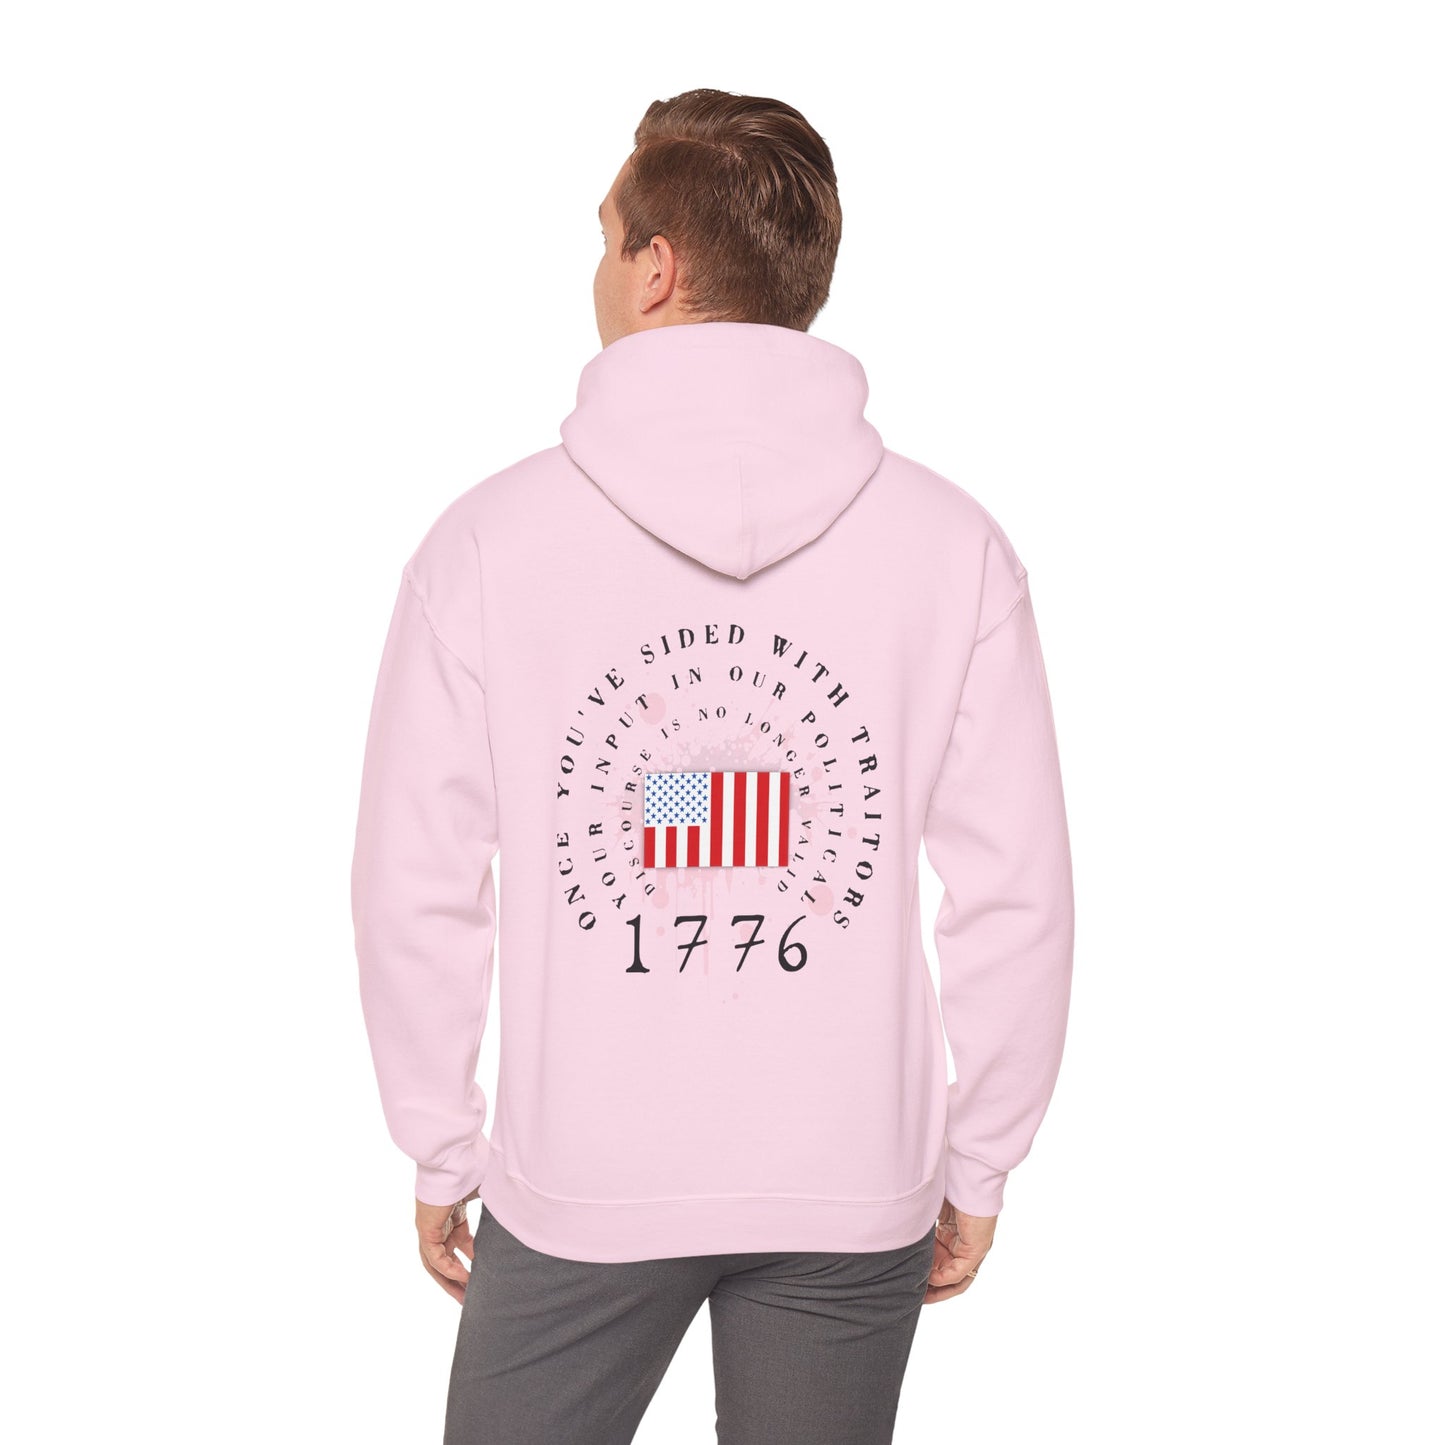 Once You've Sided With Traitors - Flag Hoodie